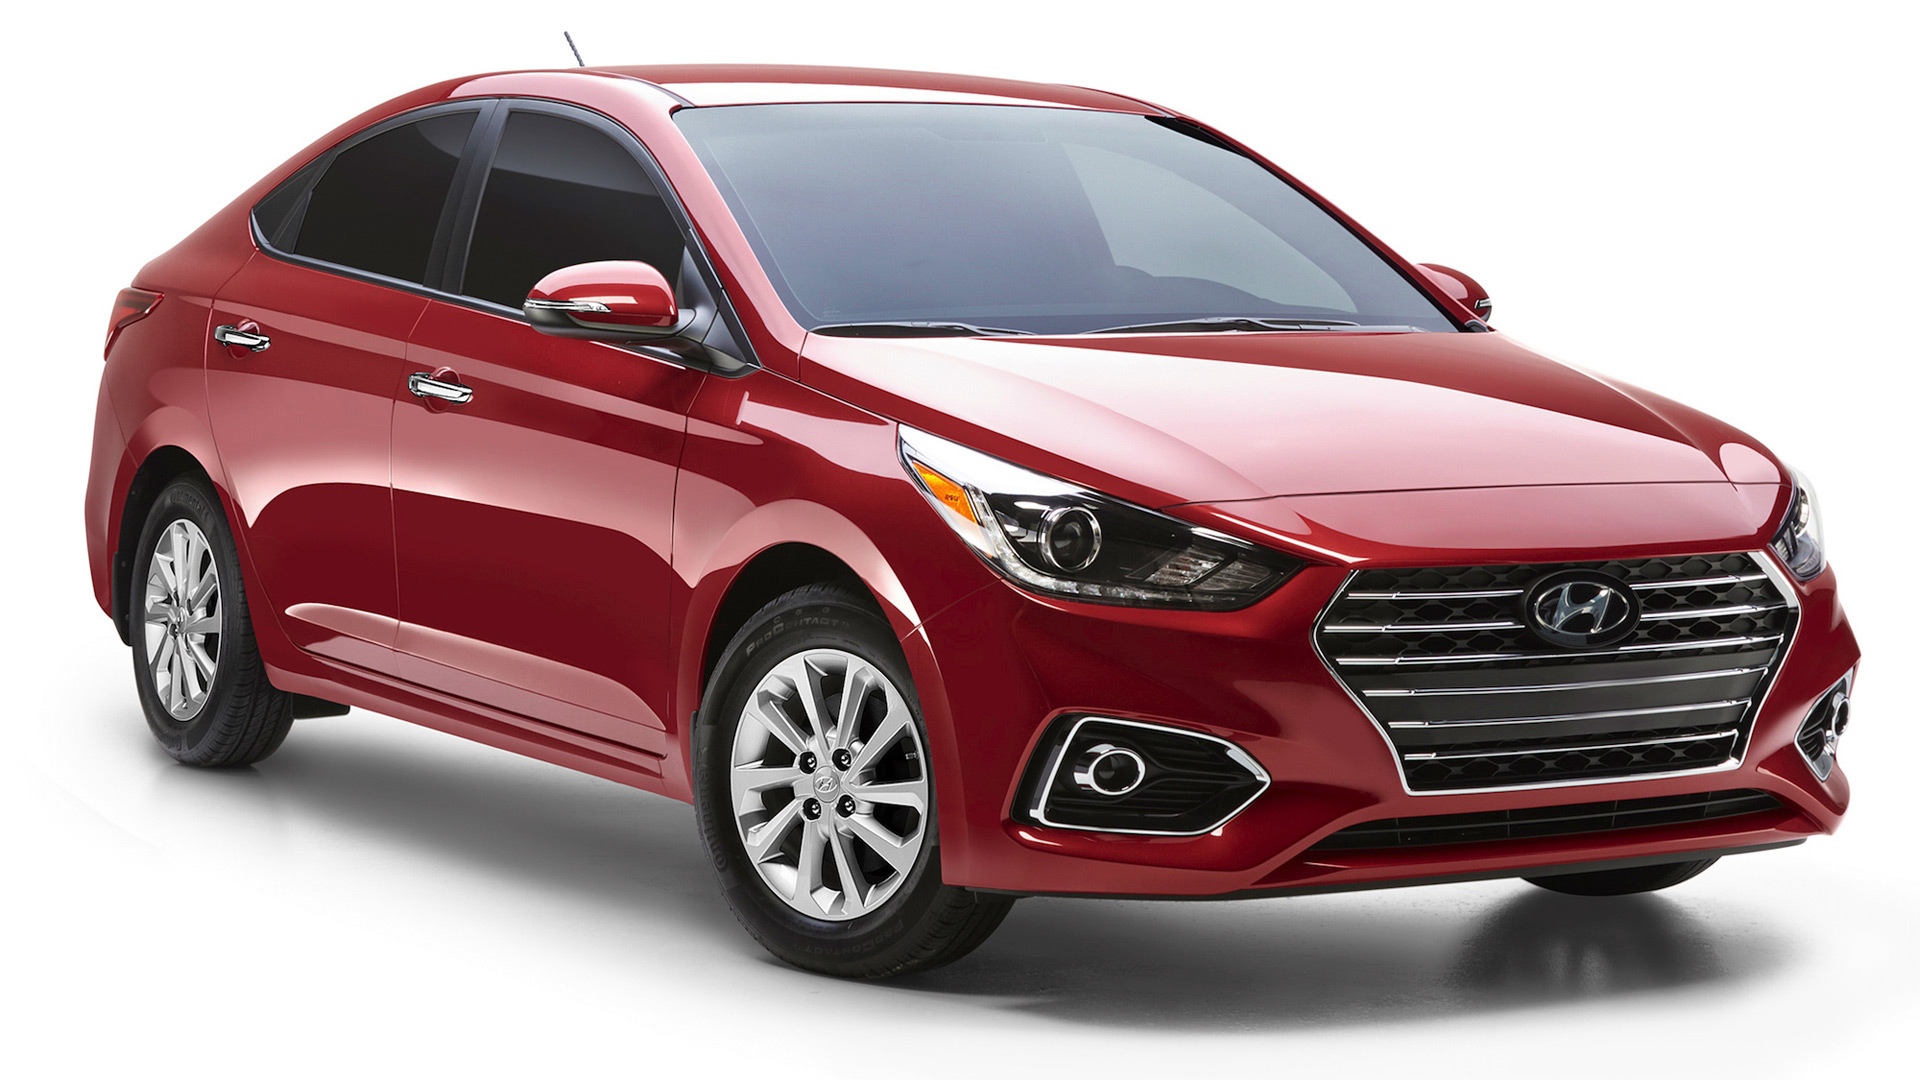 All-new 2018 Hyundai Accent adds lots of safety tech